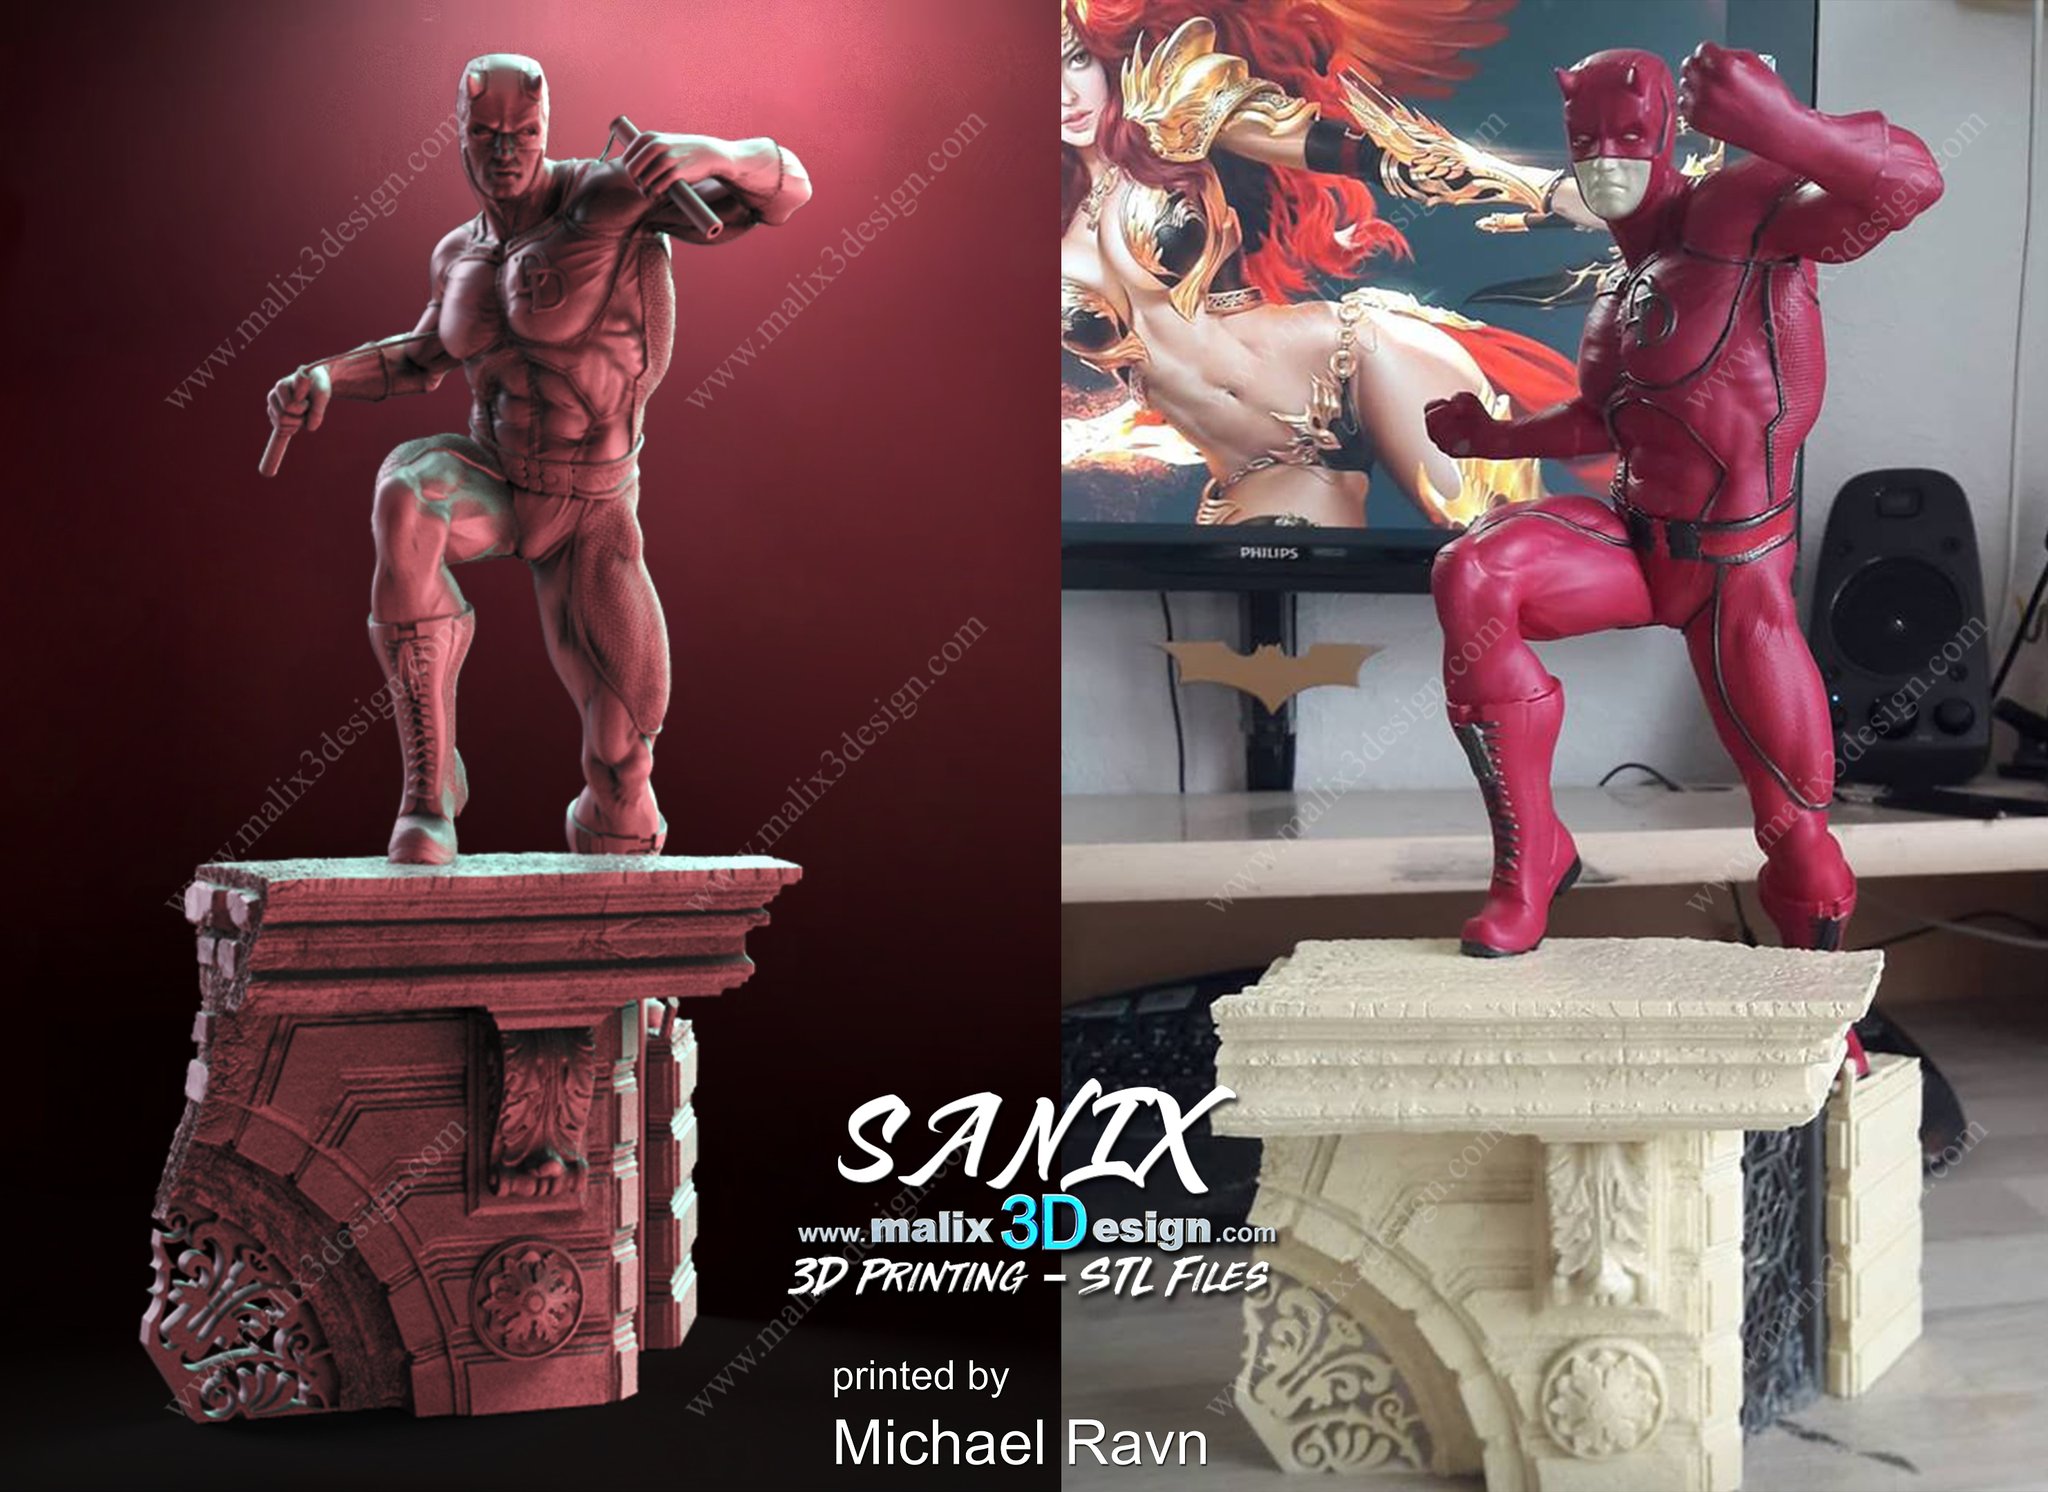 SANIX on X: "Gorgeous 3D Printed result of Daredevil by Michael